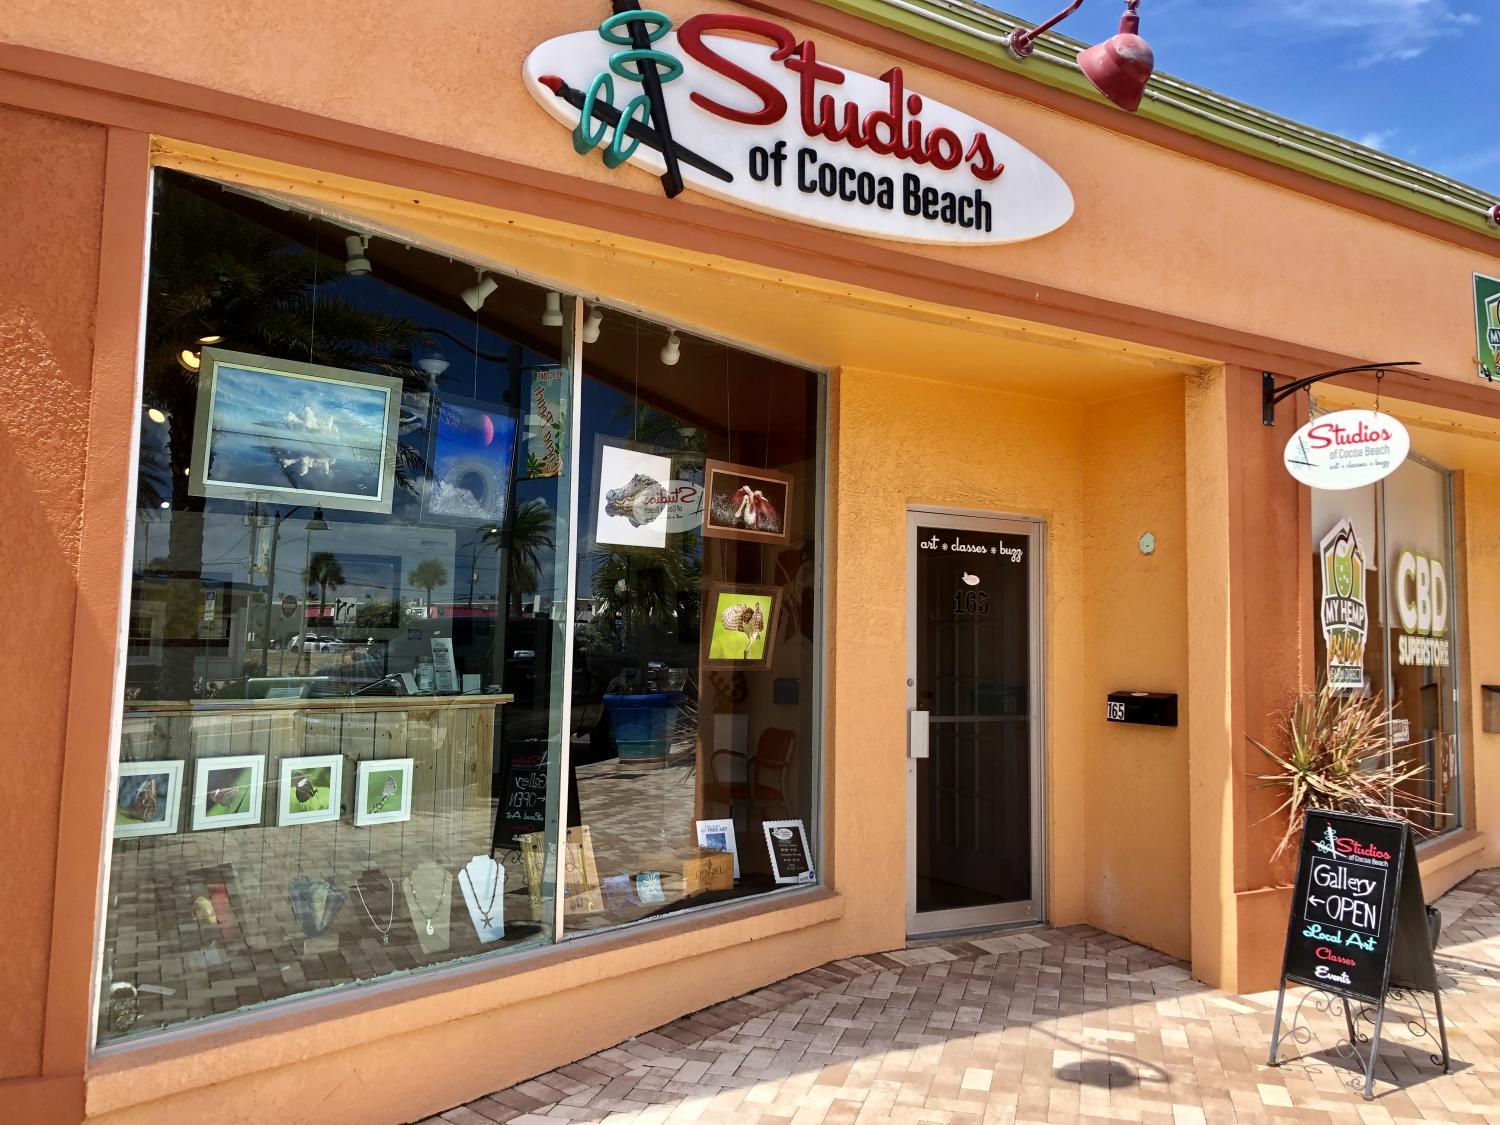 Studios of Cocoa Beach Sponsors Street Cleanup